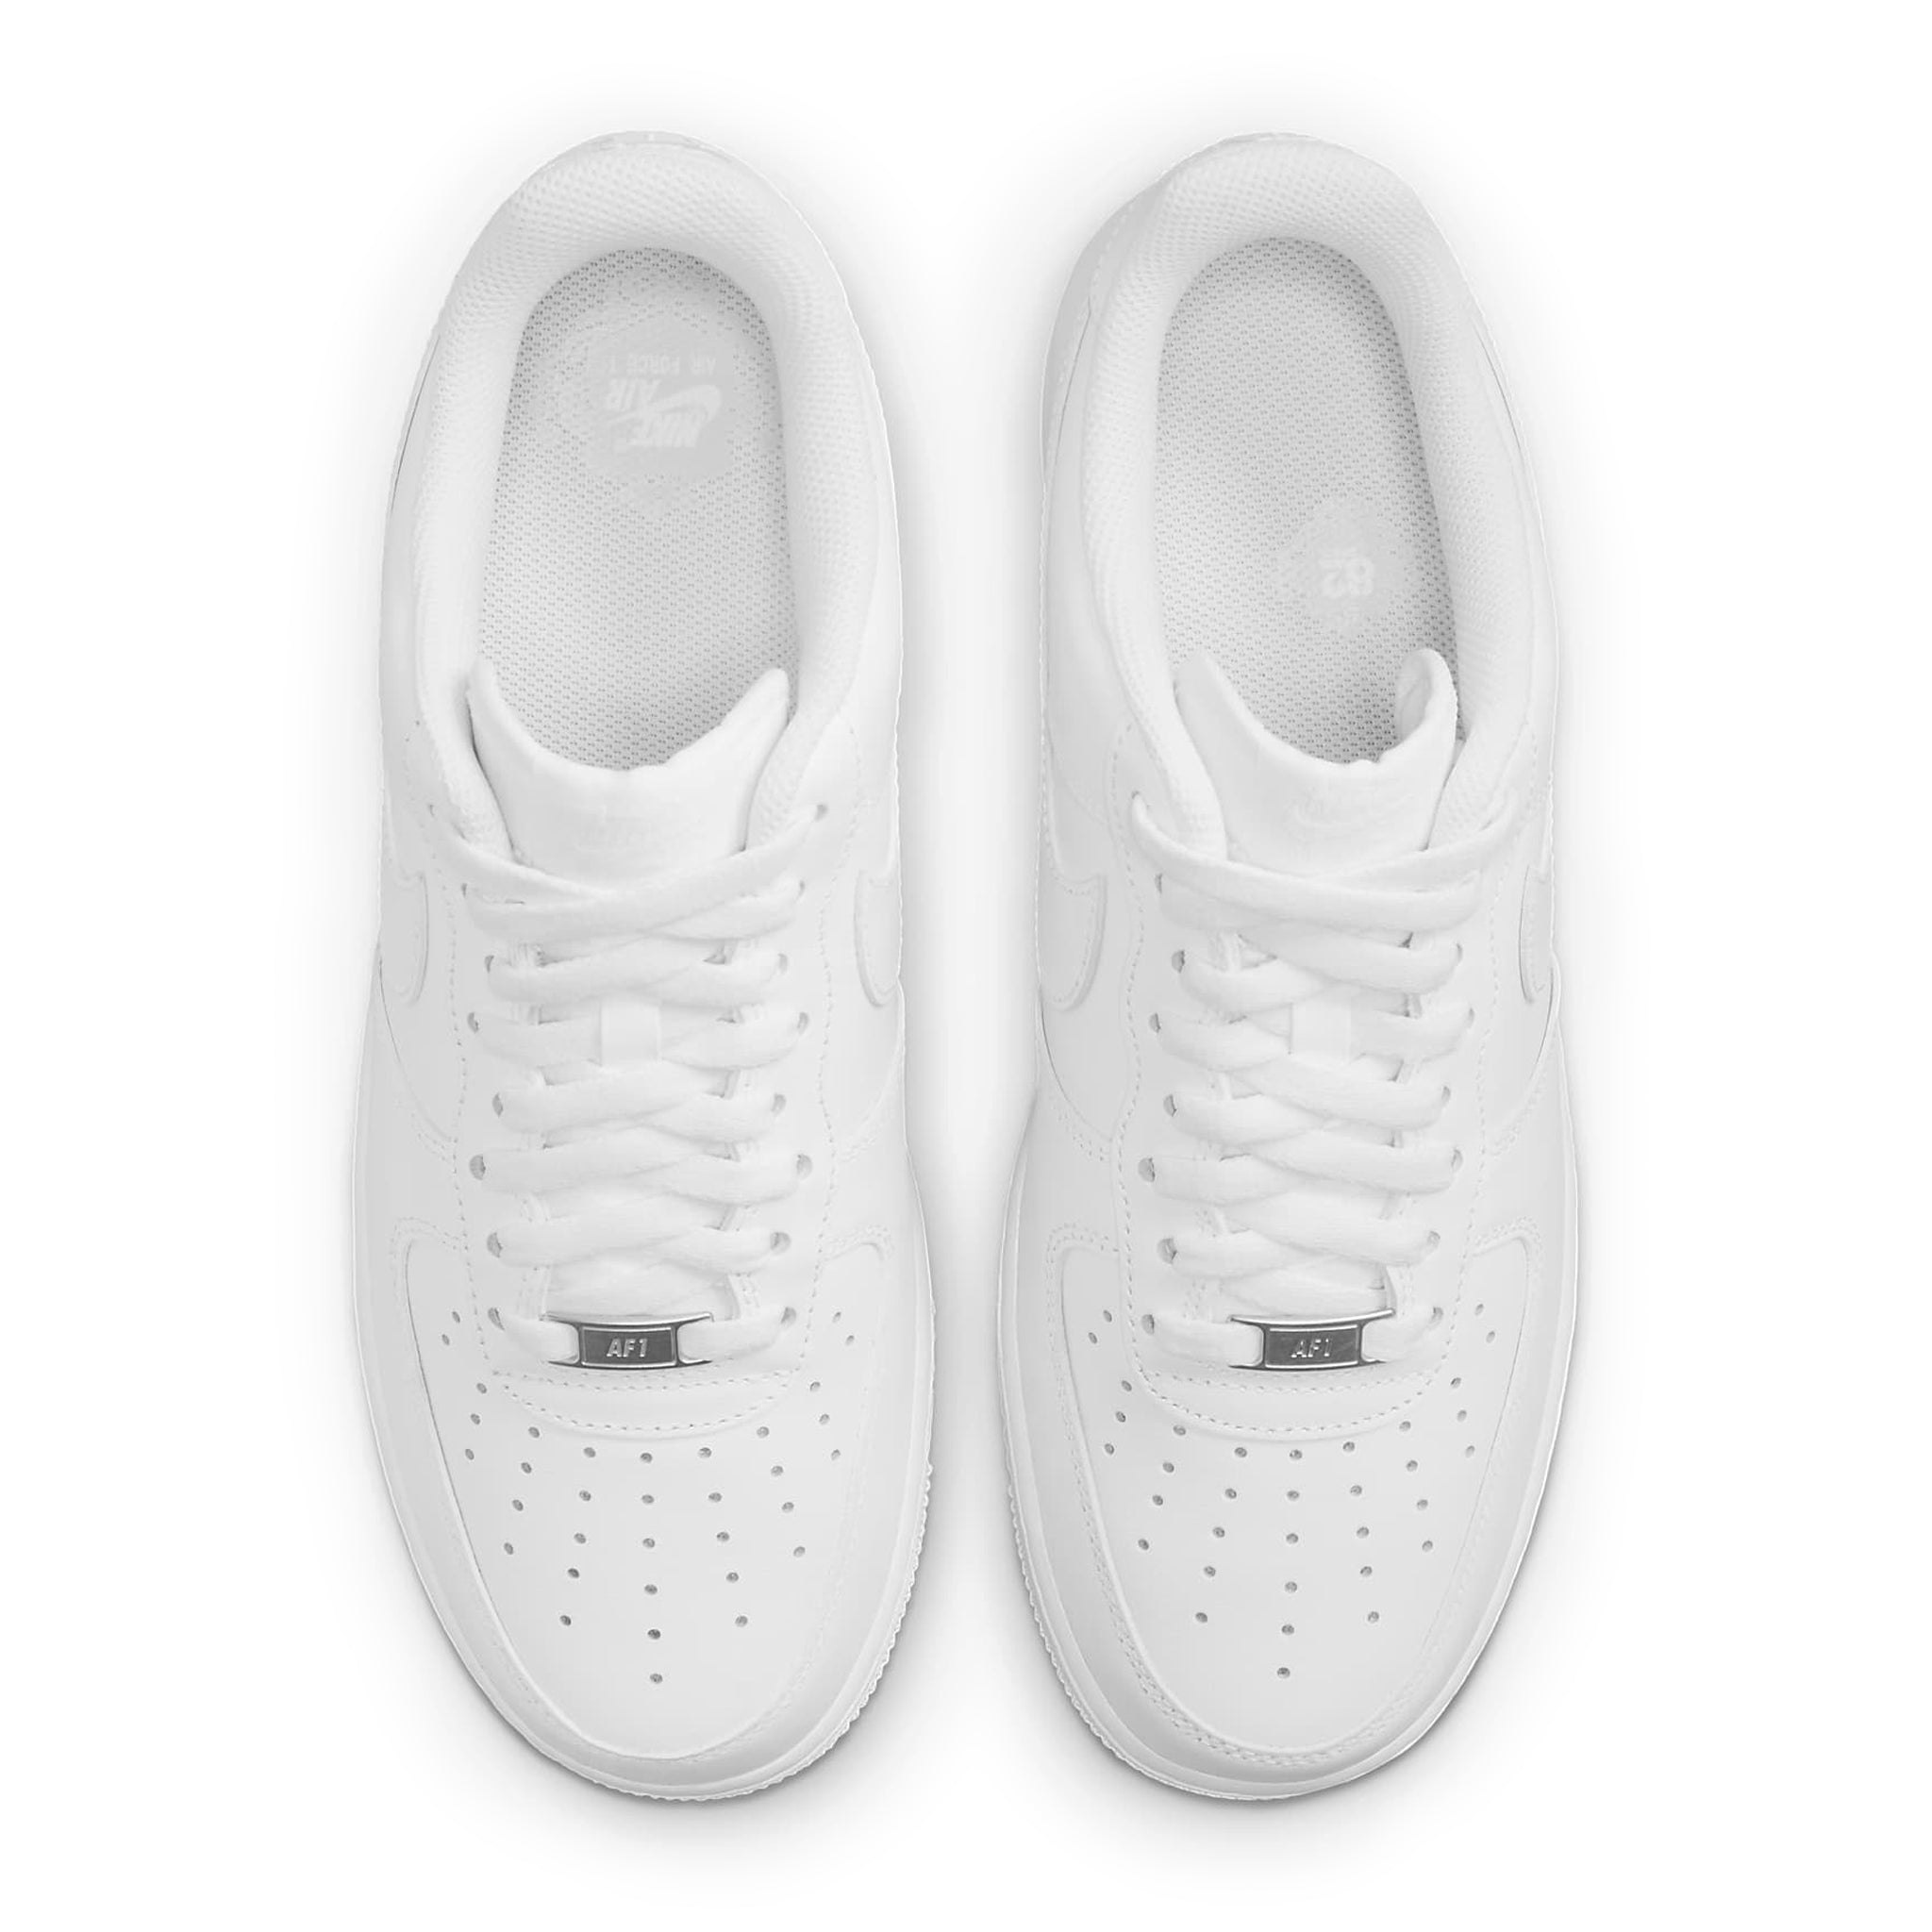 Top view of Nike Air Force 1 Low '07 White